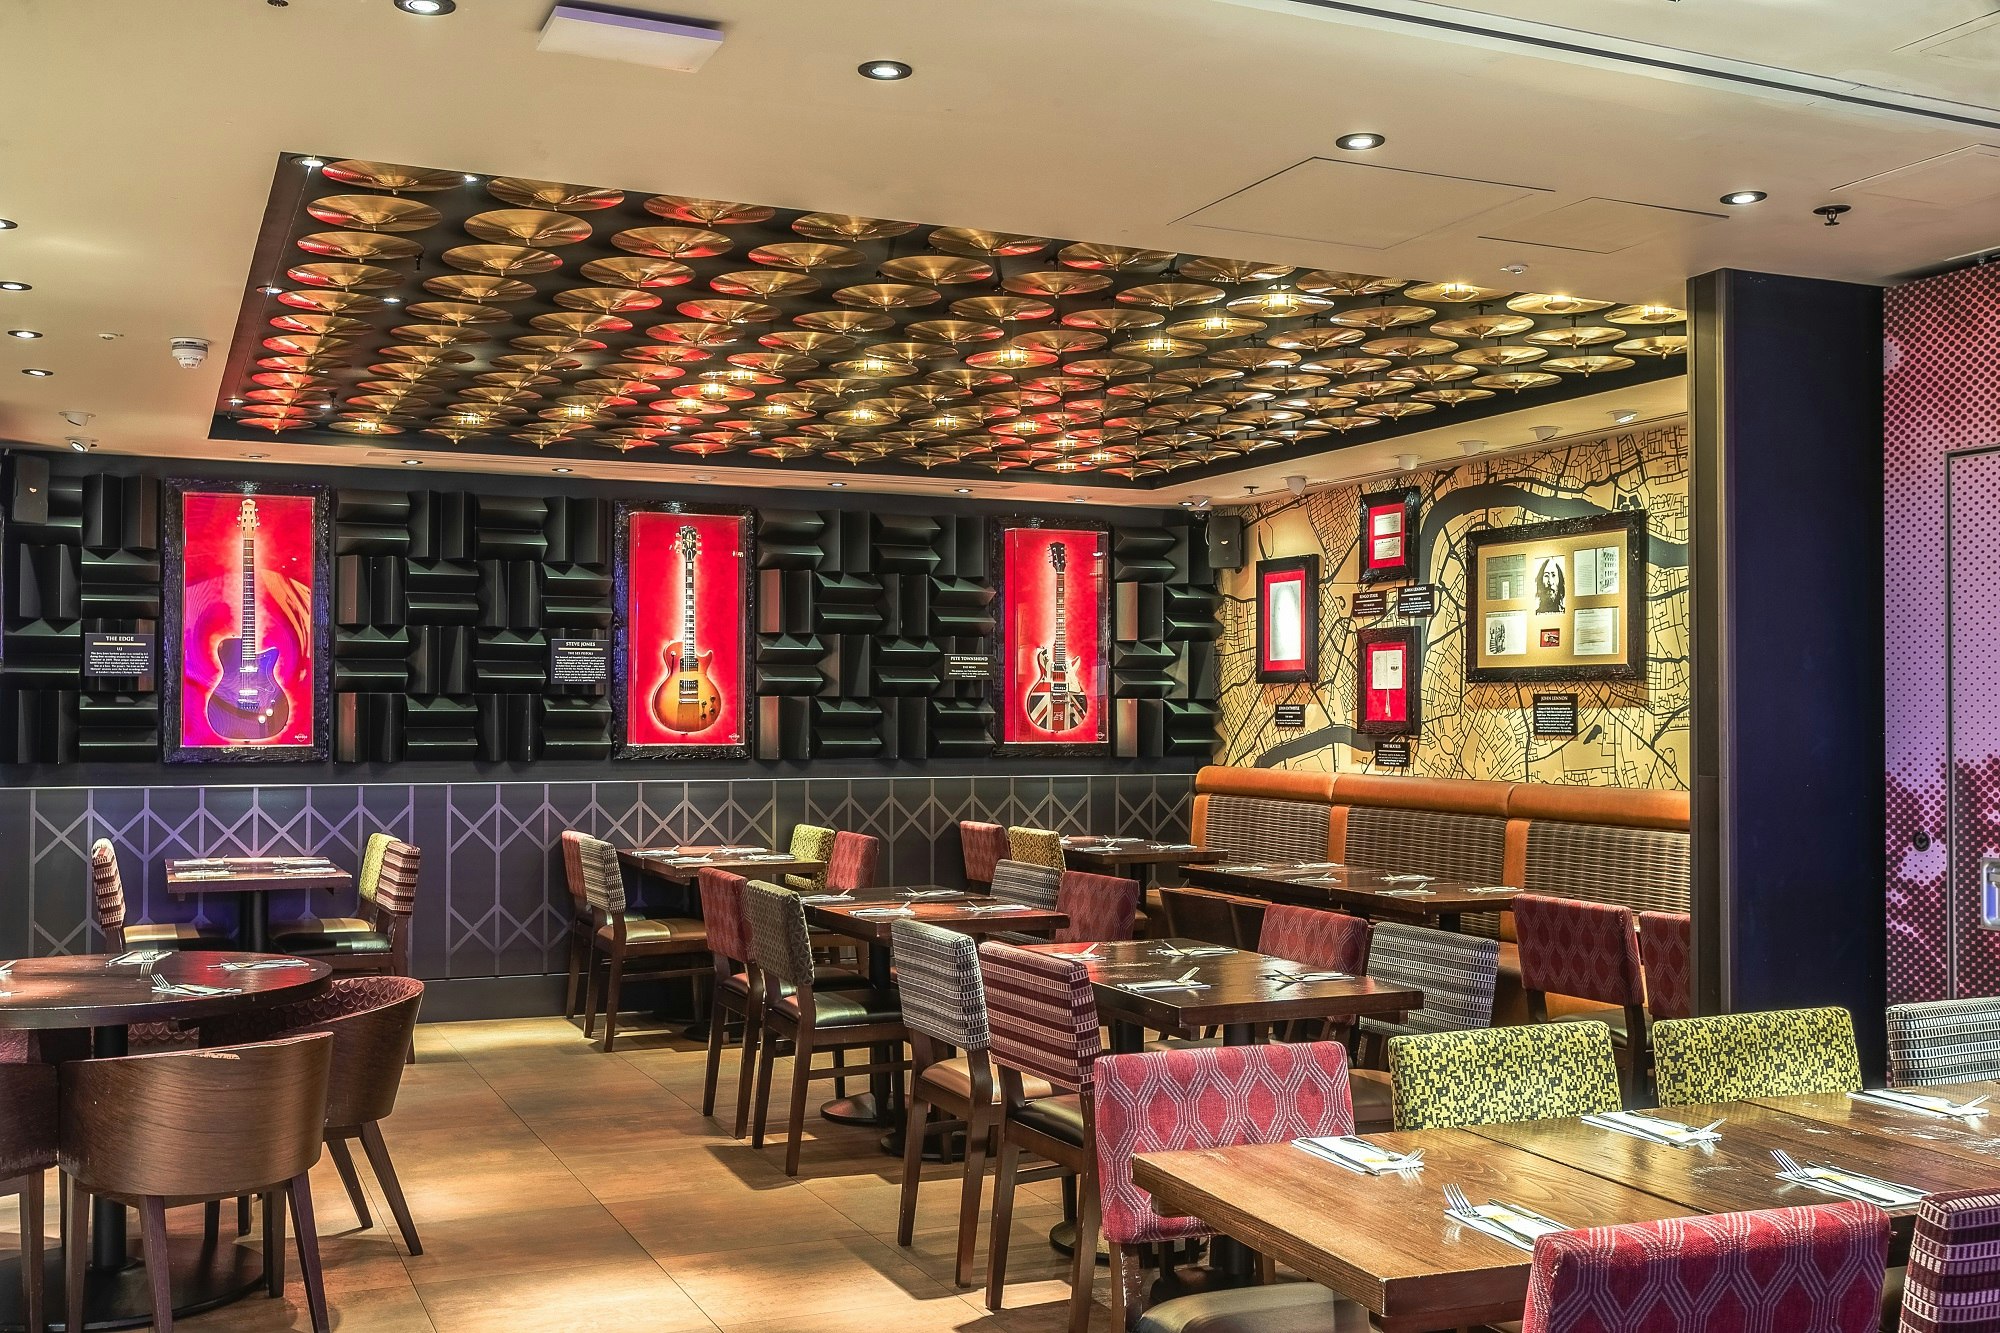 Hard Rock Cafe Piccadilly Circus - Legends Room image 5